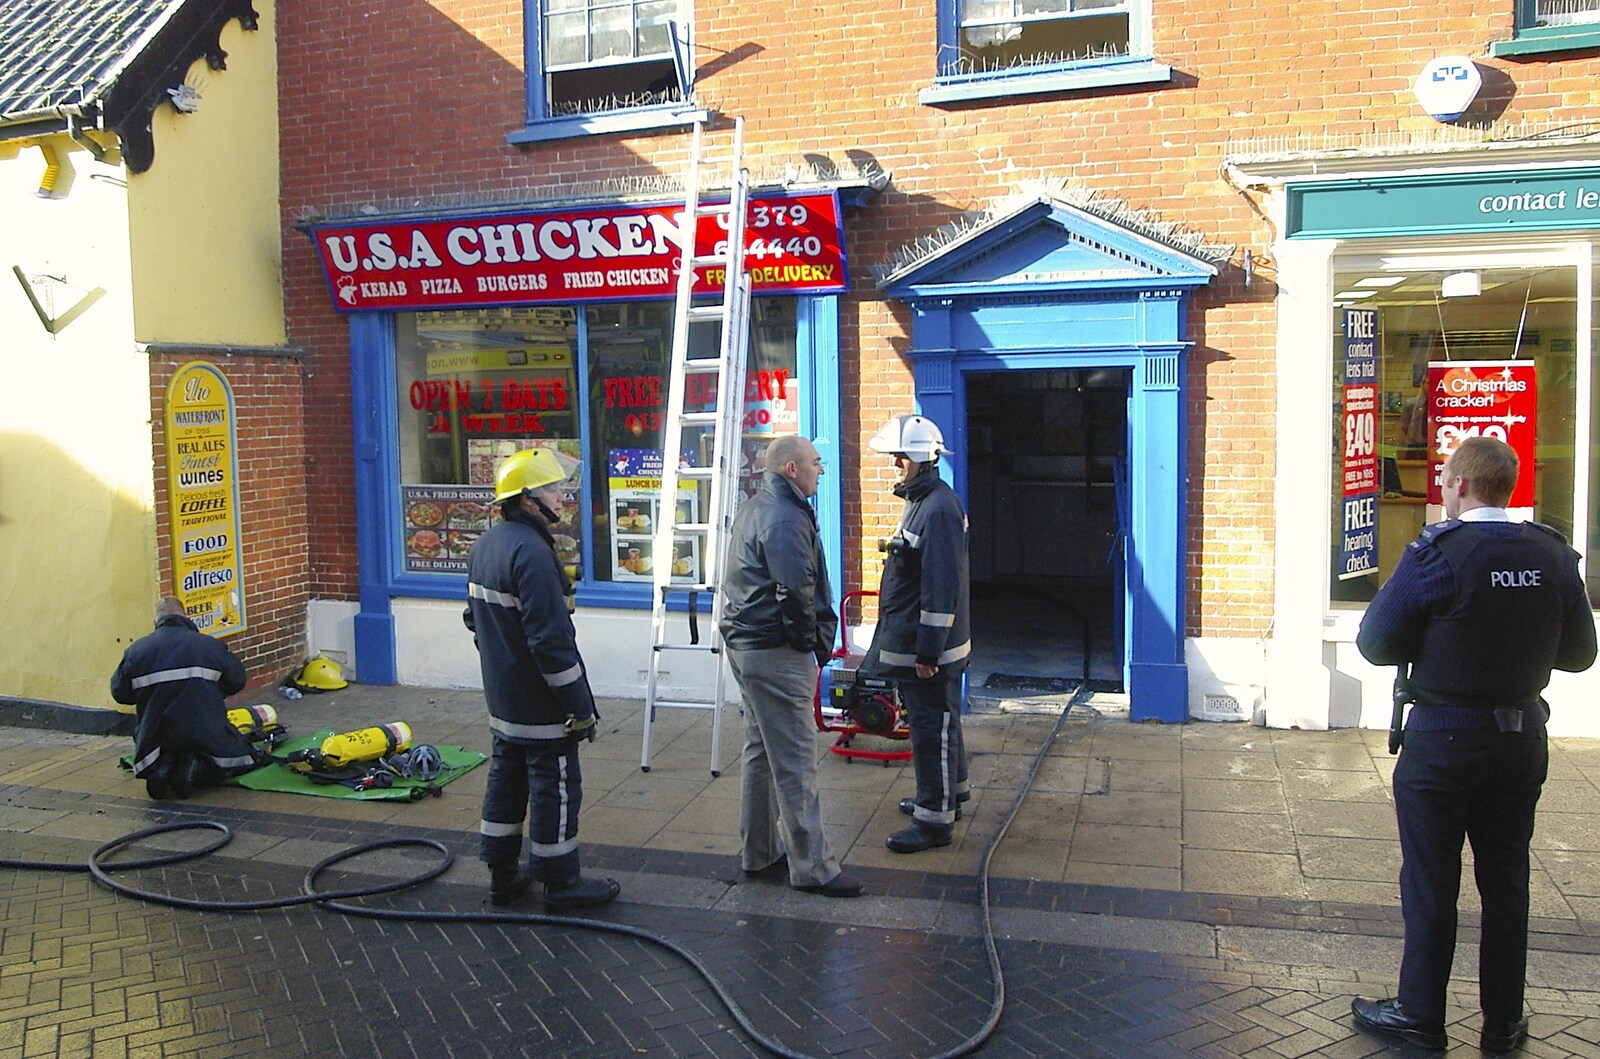 The Police survey the scene from USA Chicken Catches Fire: Gov and the Ambulance, Diss, Norfolk - 19th November 2005